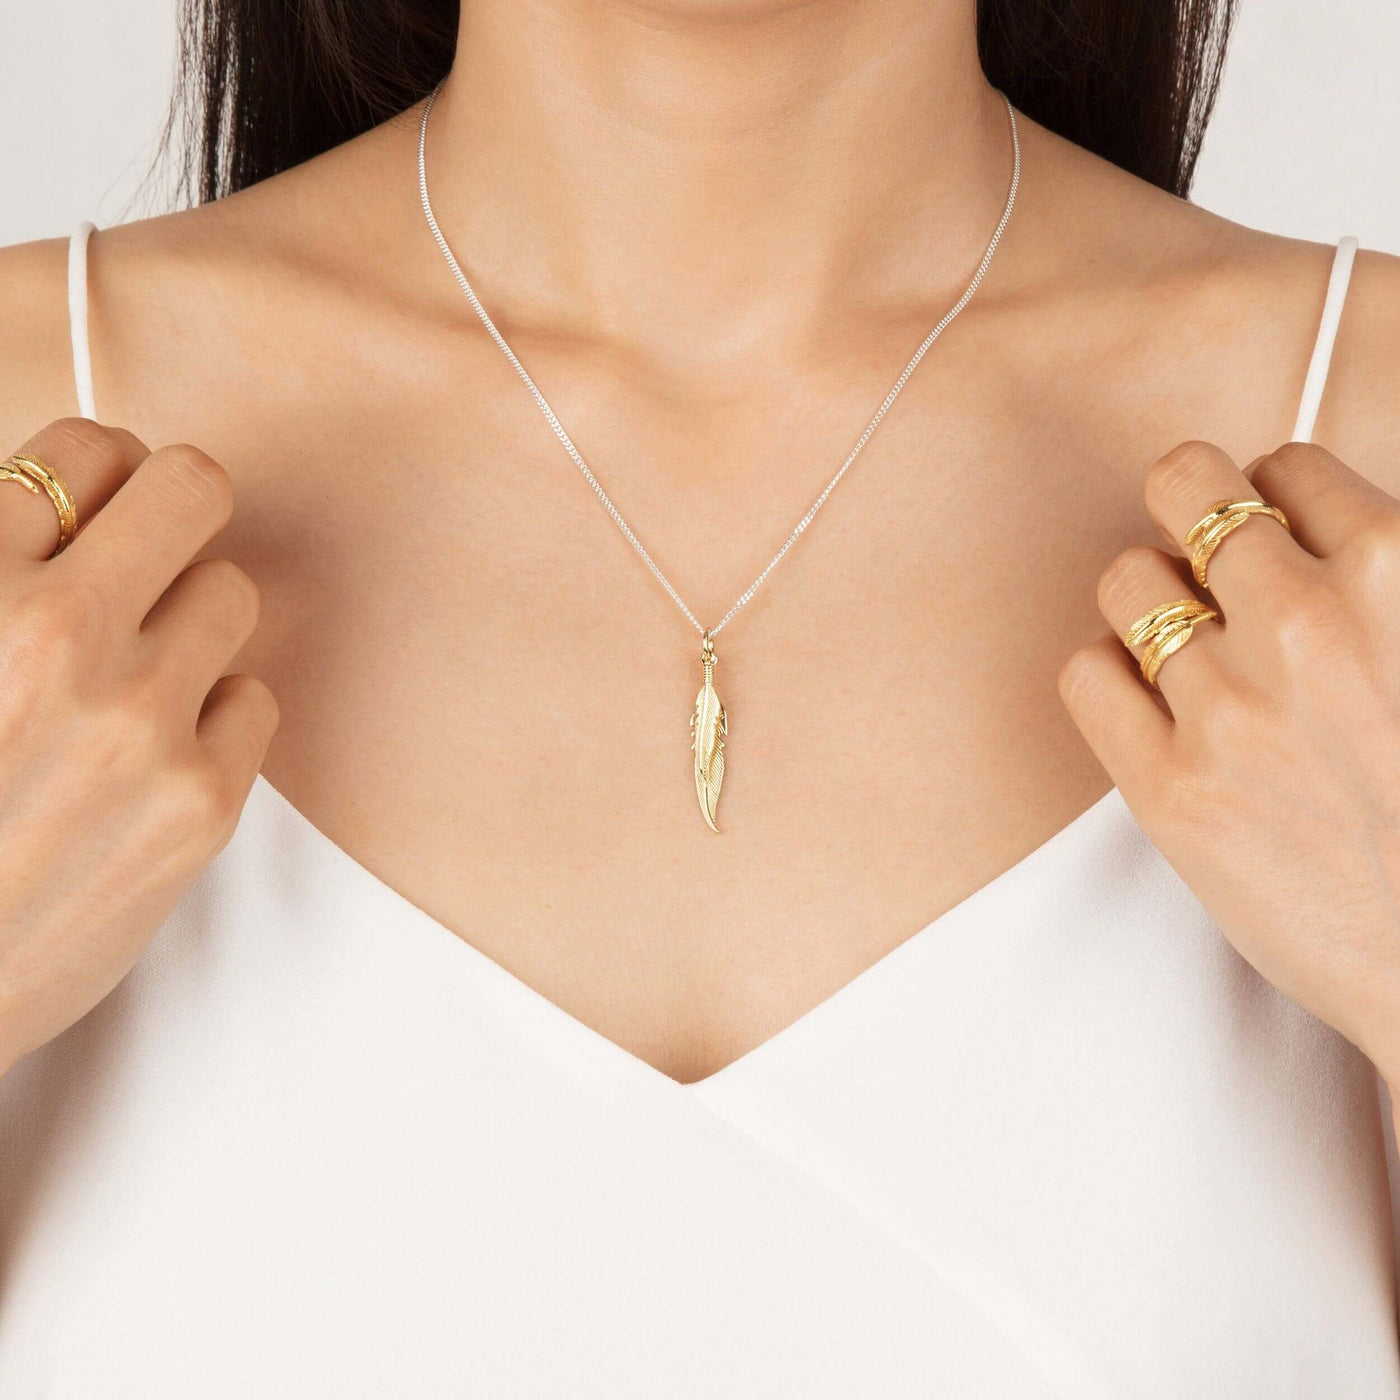 9ct Yellow Gold Feather Pendant - Feather Necklace | FIYAH